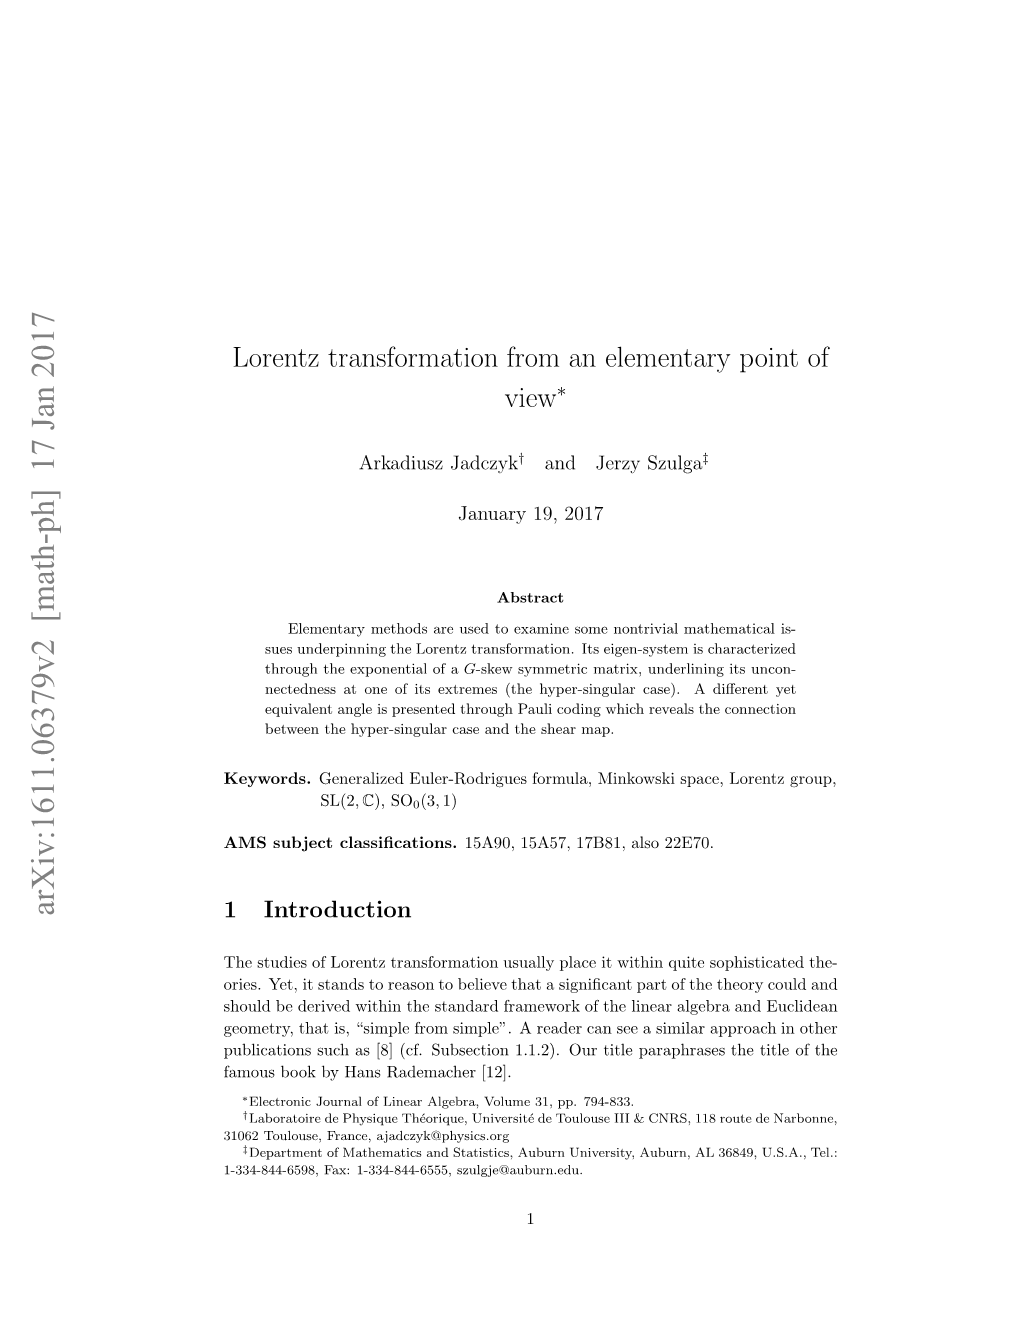 Lorentz Transformation from an Elementary Point of View 2